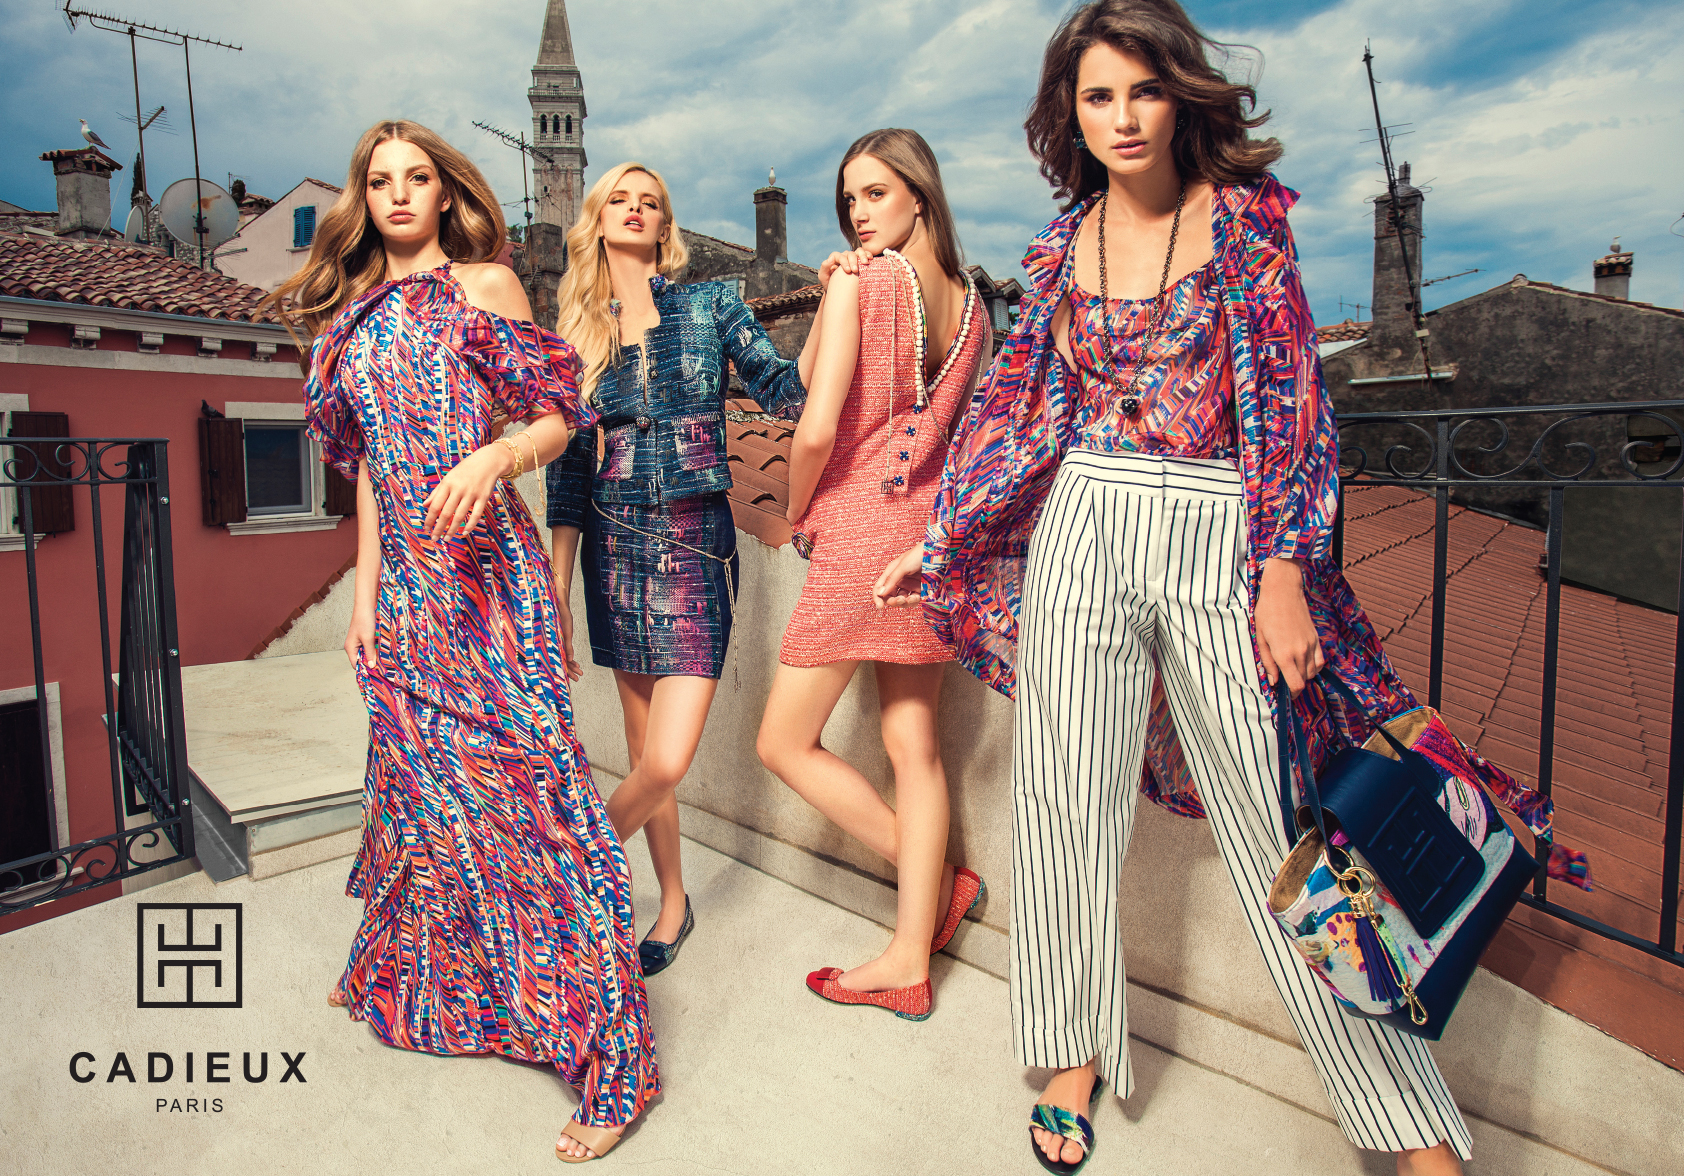 Poster design for Cadieux Paris. In the picture we see four models wearing clothes by Cadieux Paris.